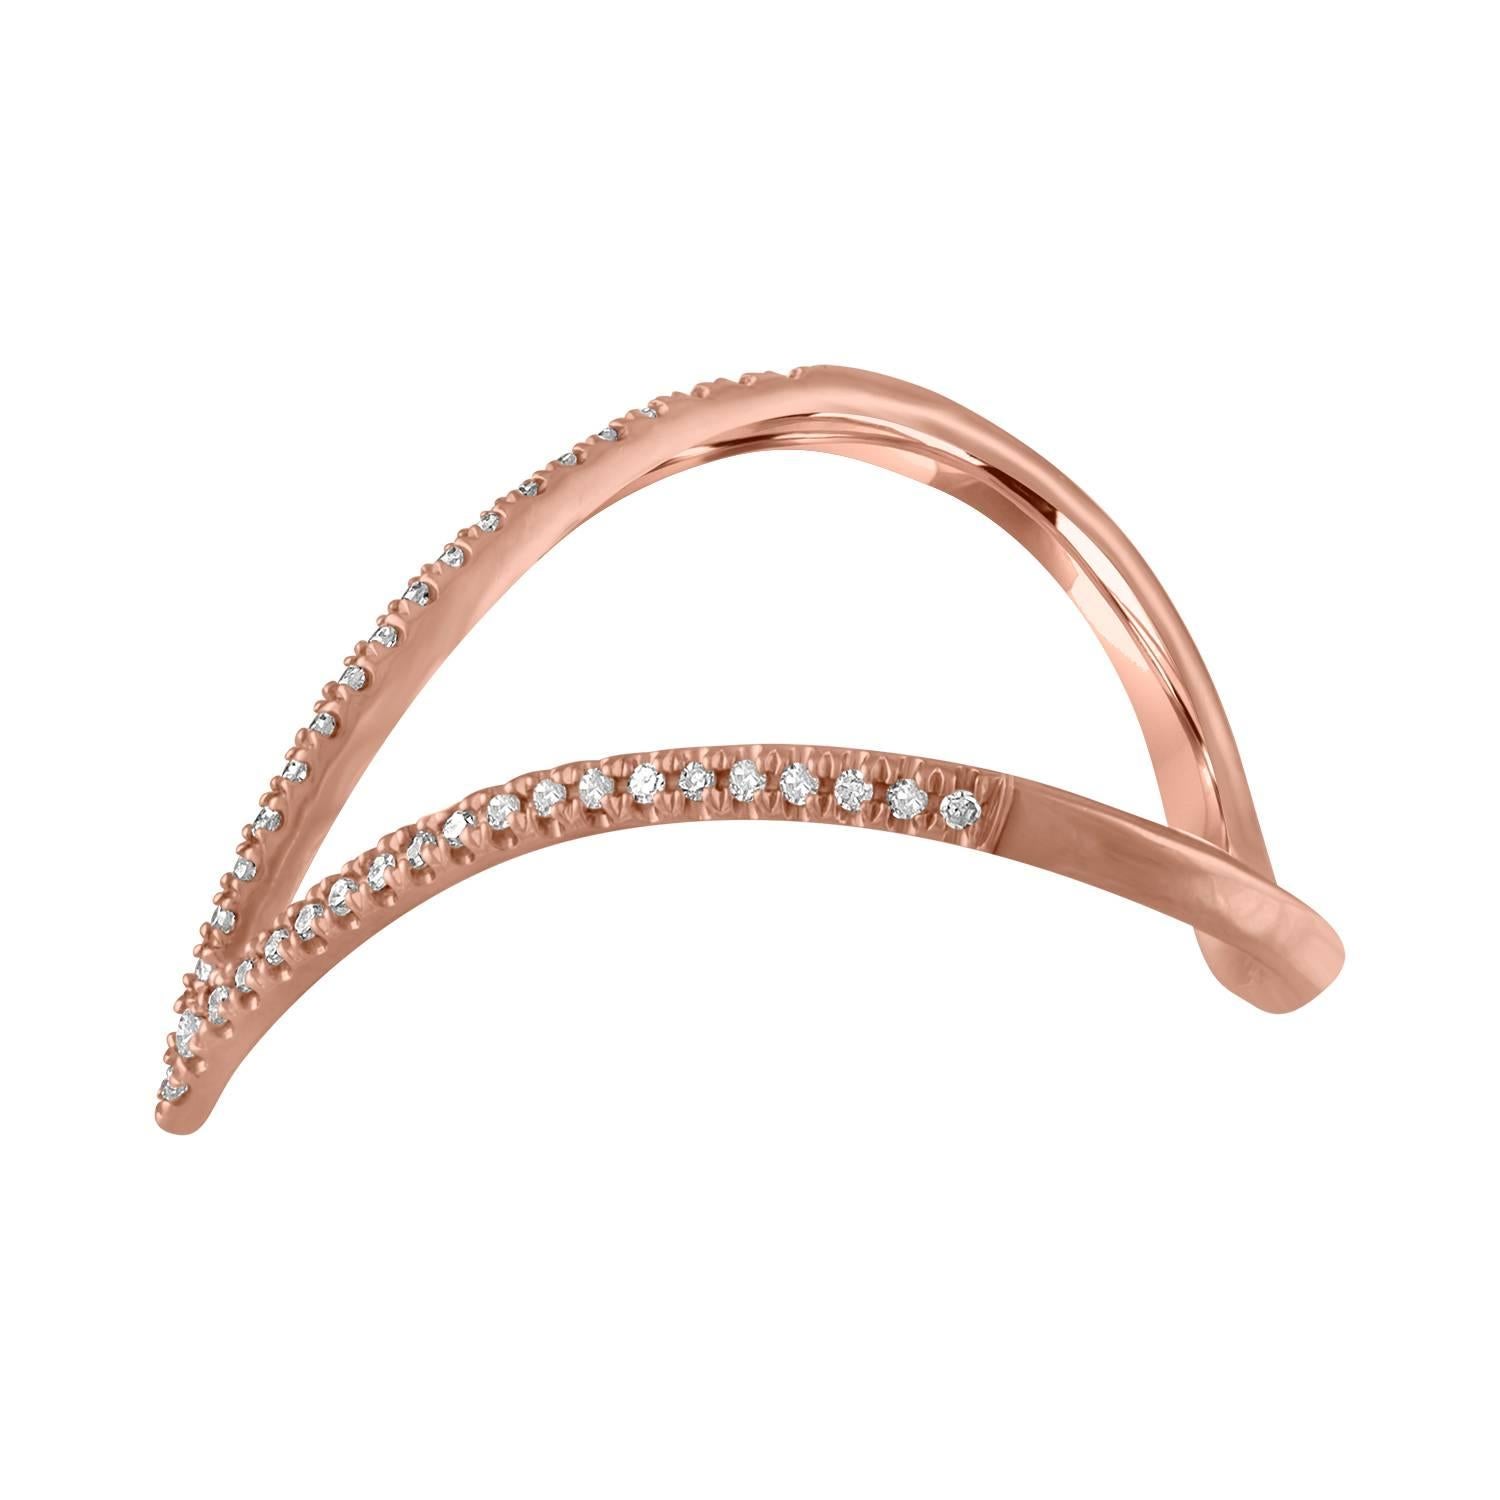 Very Fun V Shaped Ring.
The ring is 14K Rose Gold.
There are 0.40 Carats In Diamonds H/I SI.
The ring is a size 7.5, sizable.
The ring weighs 2.0 Grams.